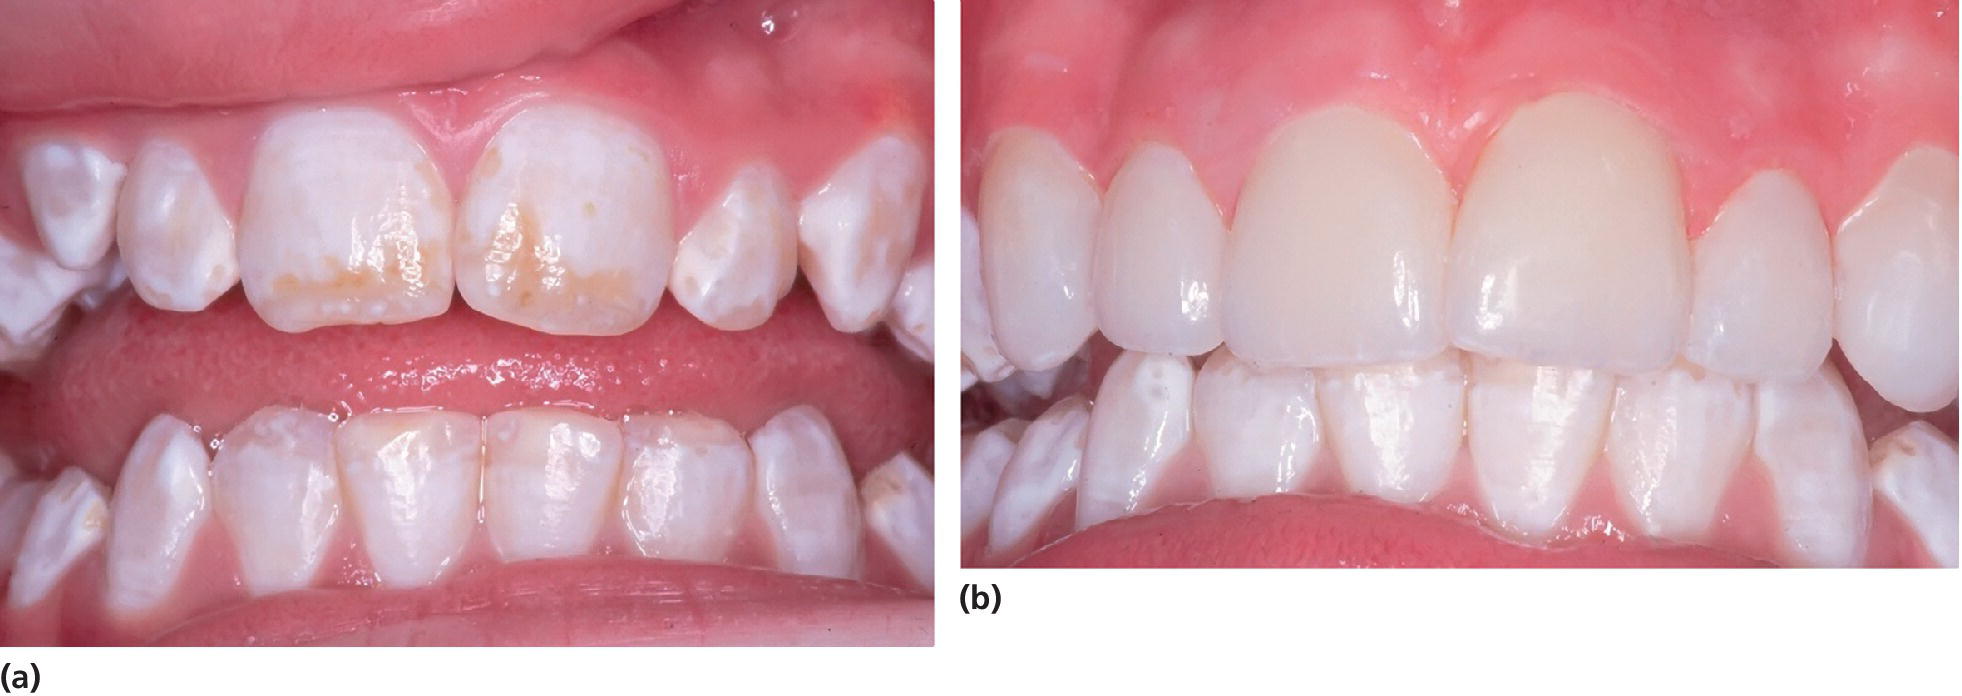 Photos of teeth and gums of 13-year-old girl, displaying moderate dental fluorosis (left) and porcelain veneers attached to the upper left canine to the upper right (right).